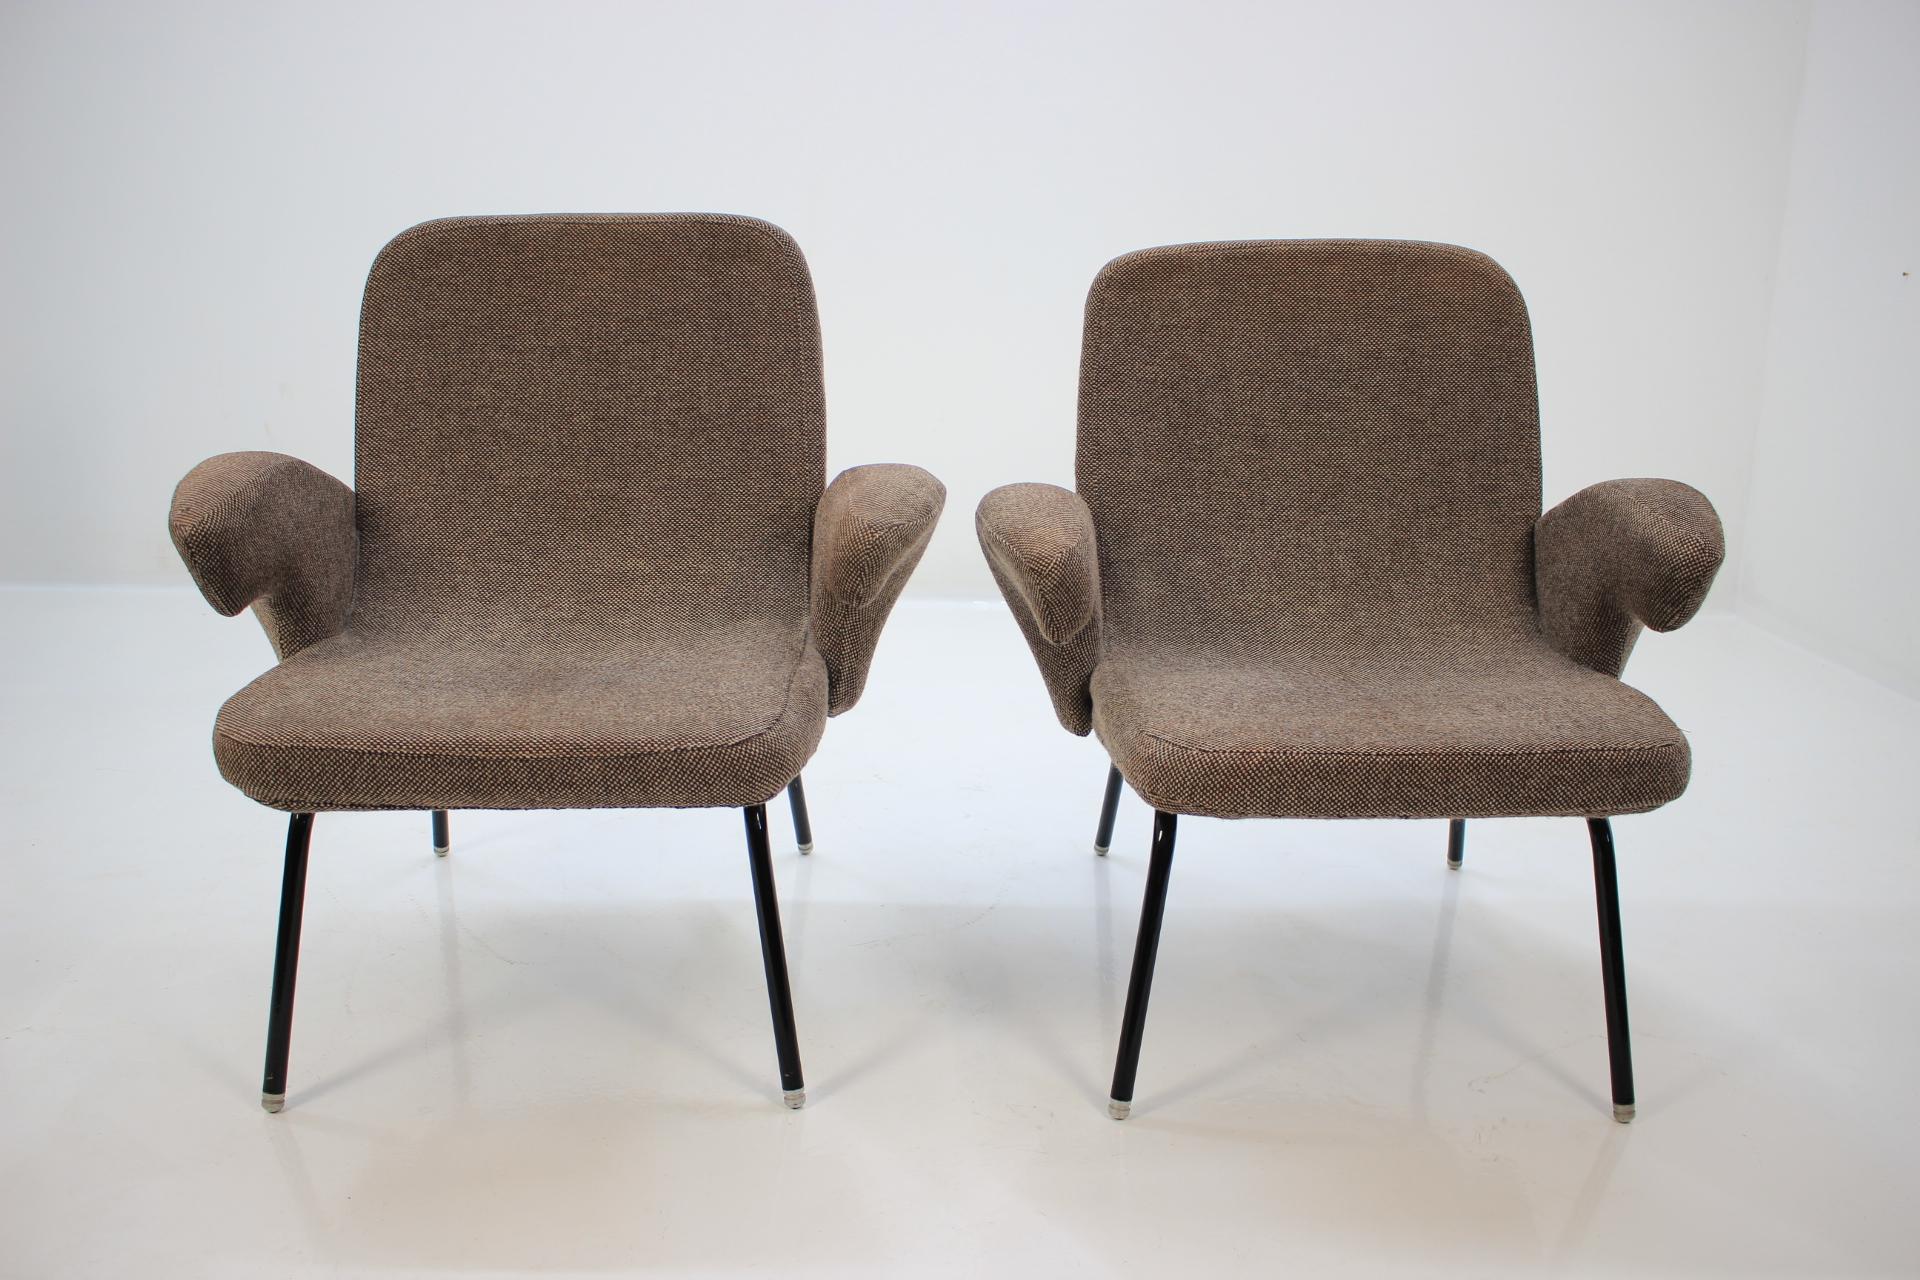 Brutalist Armchairs by Alan Fuchs, Set of Two, 1961